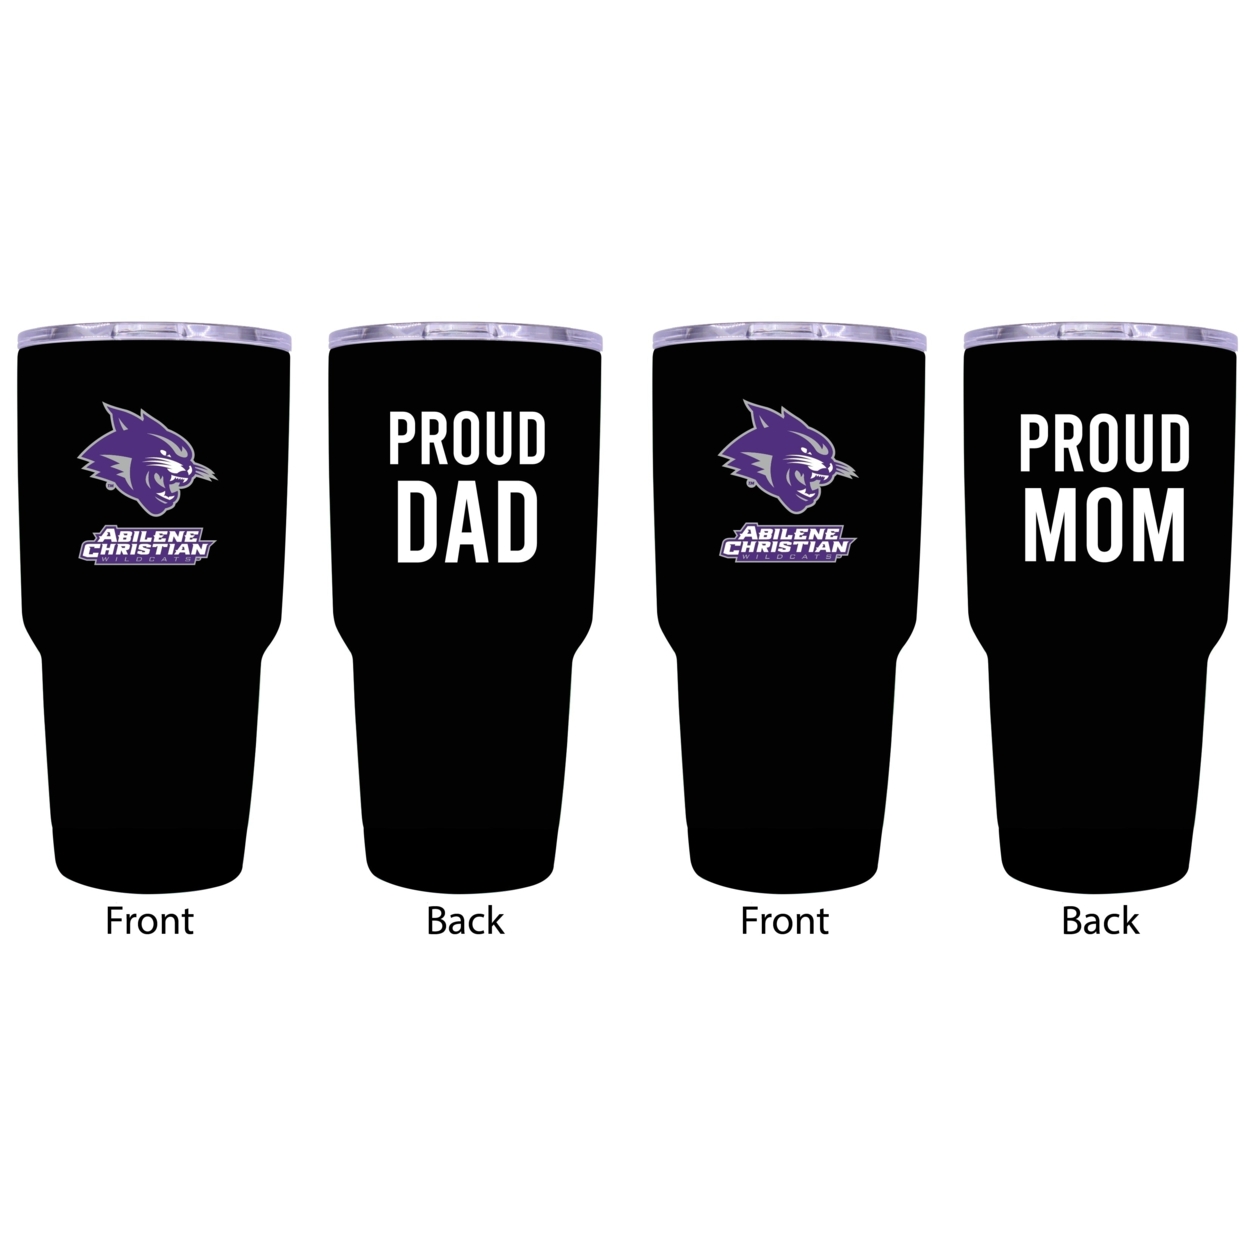 Abilene Christian University Proud Mom And Dad 24 Oz Insulated Stainless Steel Tumblers 2 Pack Black.